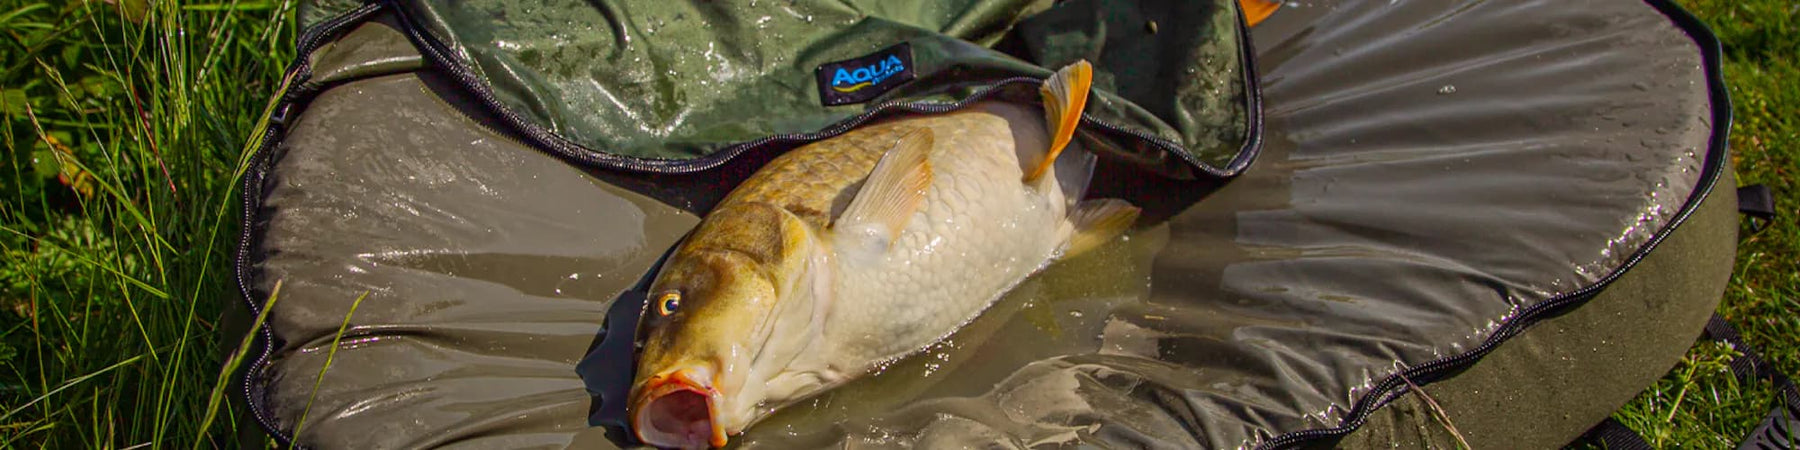 The Best Unhooking Mats For Carp Fishing